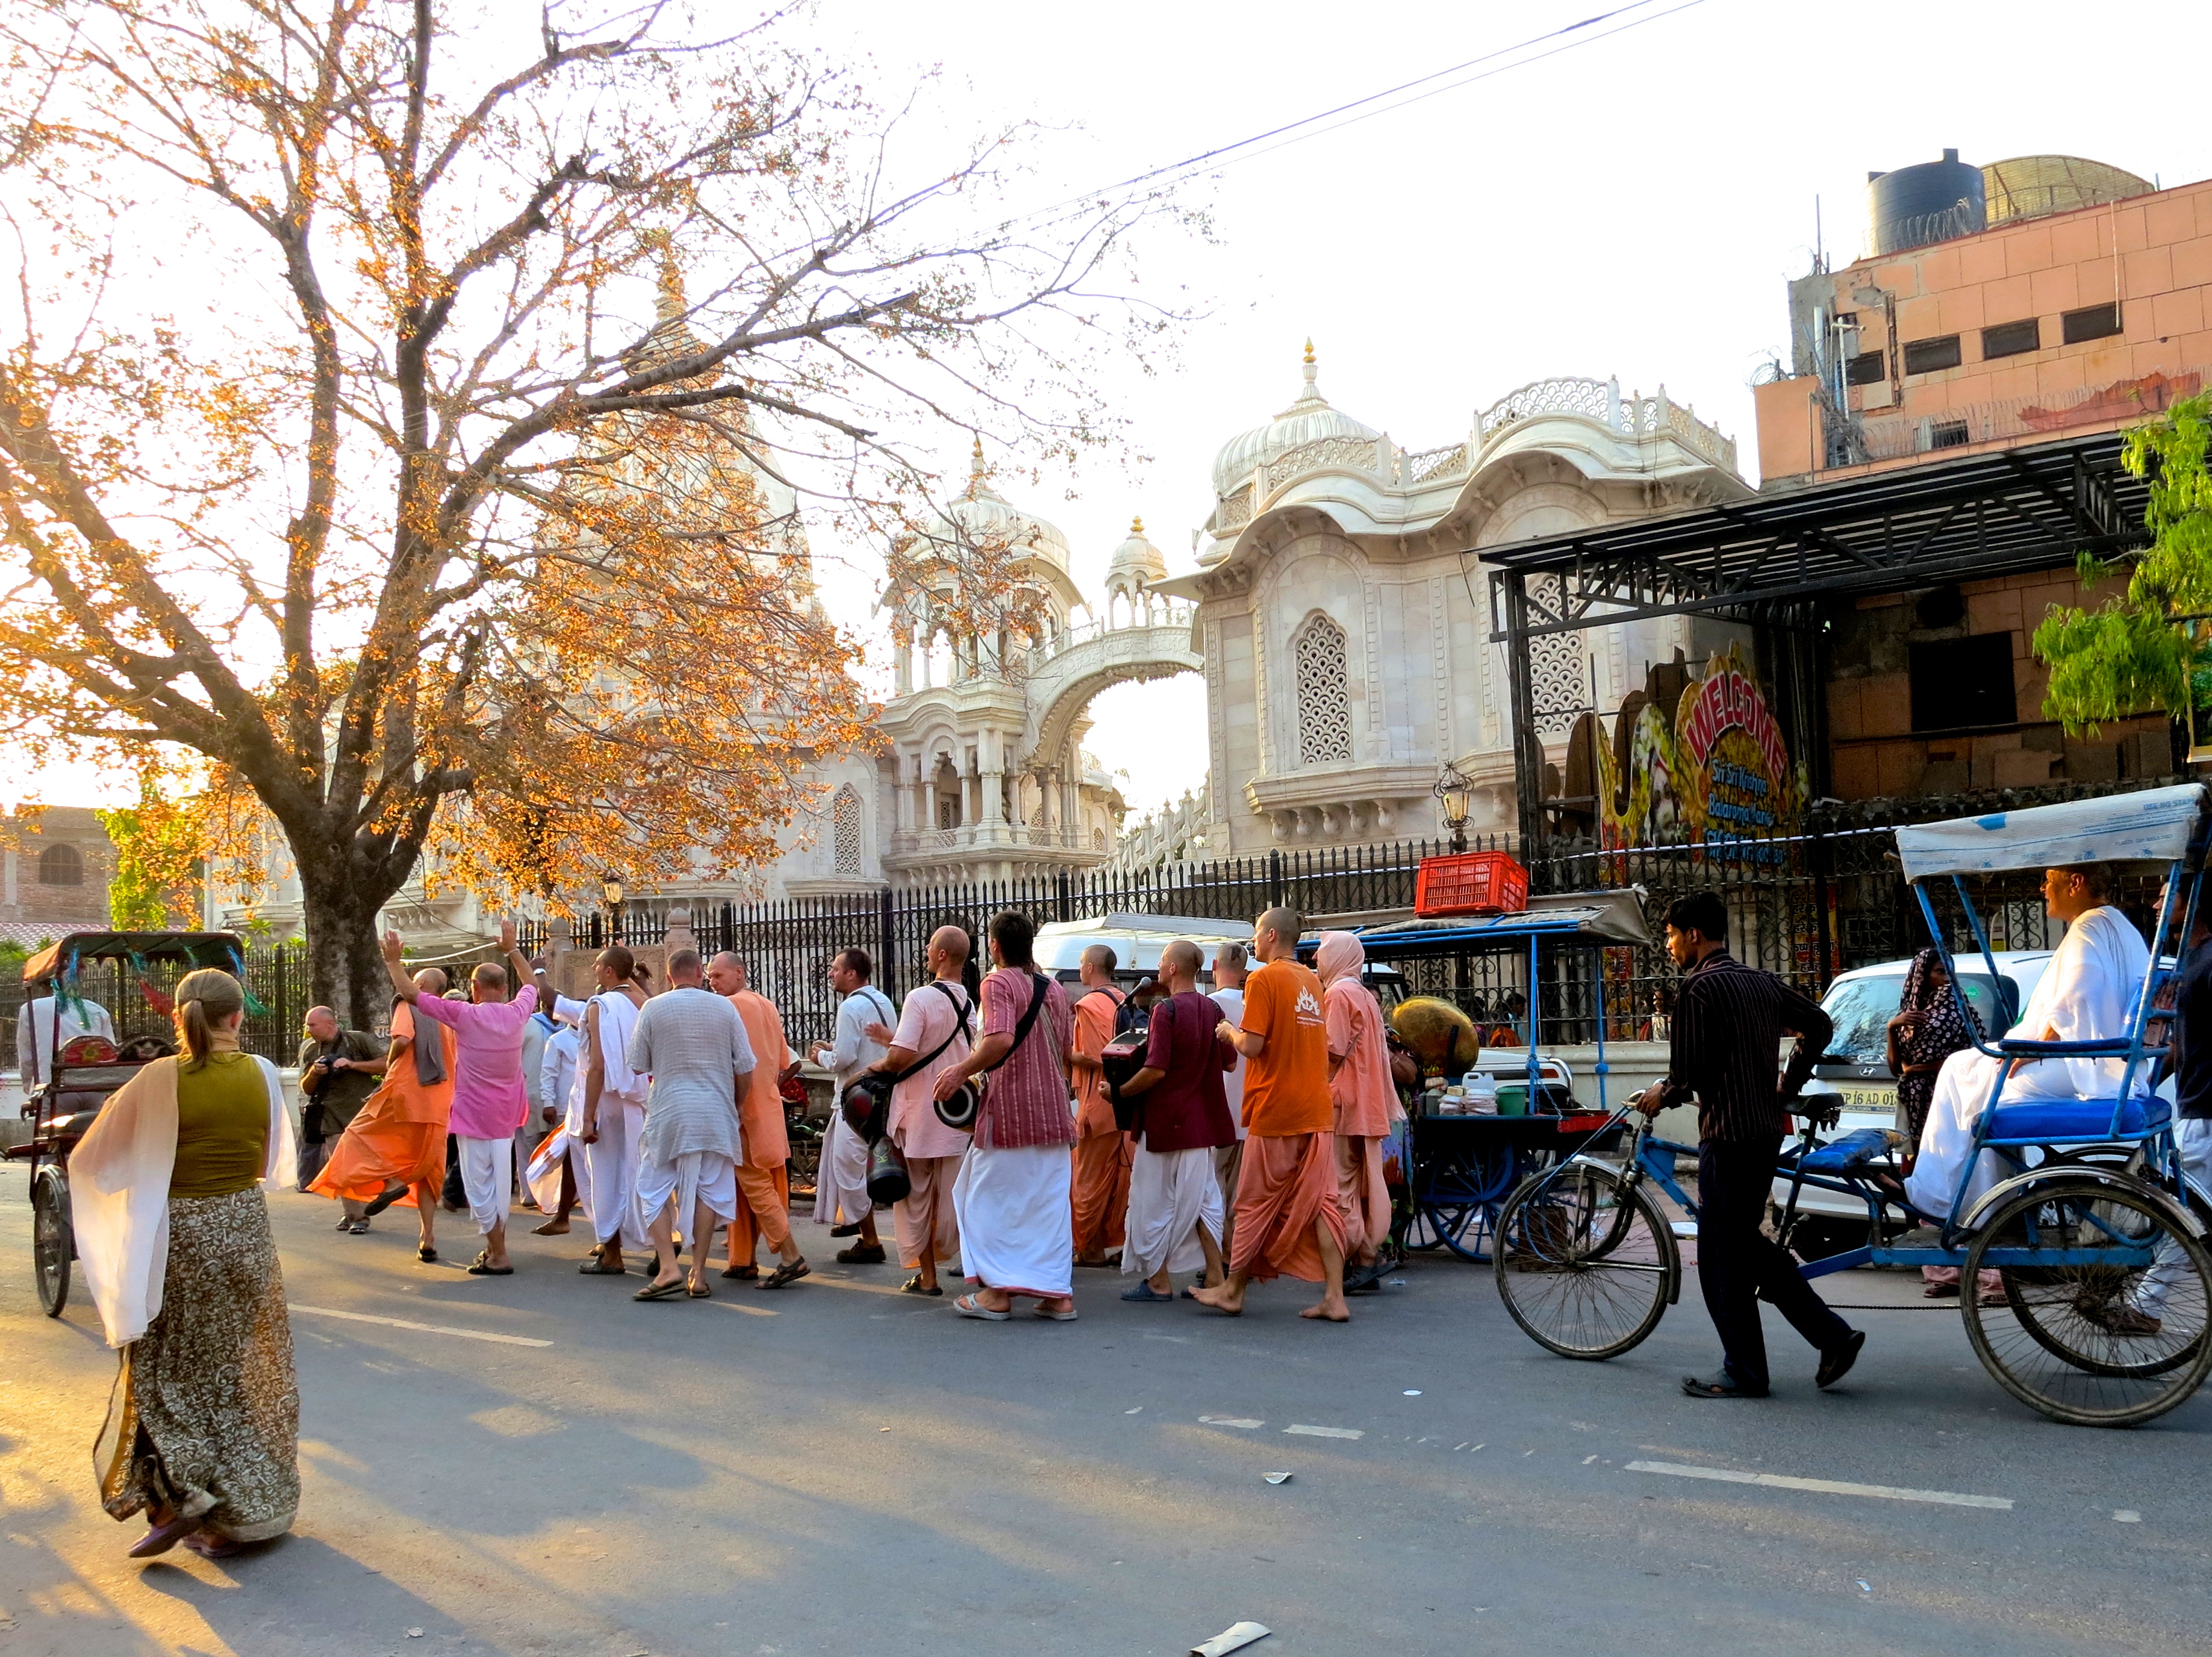 What happened to the Hare Krishna movement? I never see them on